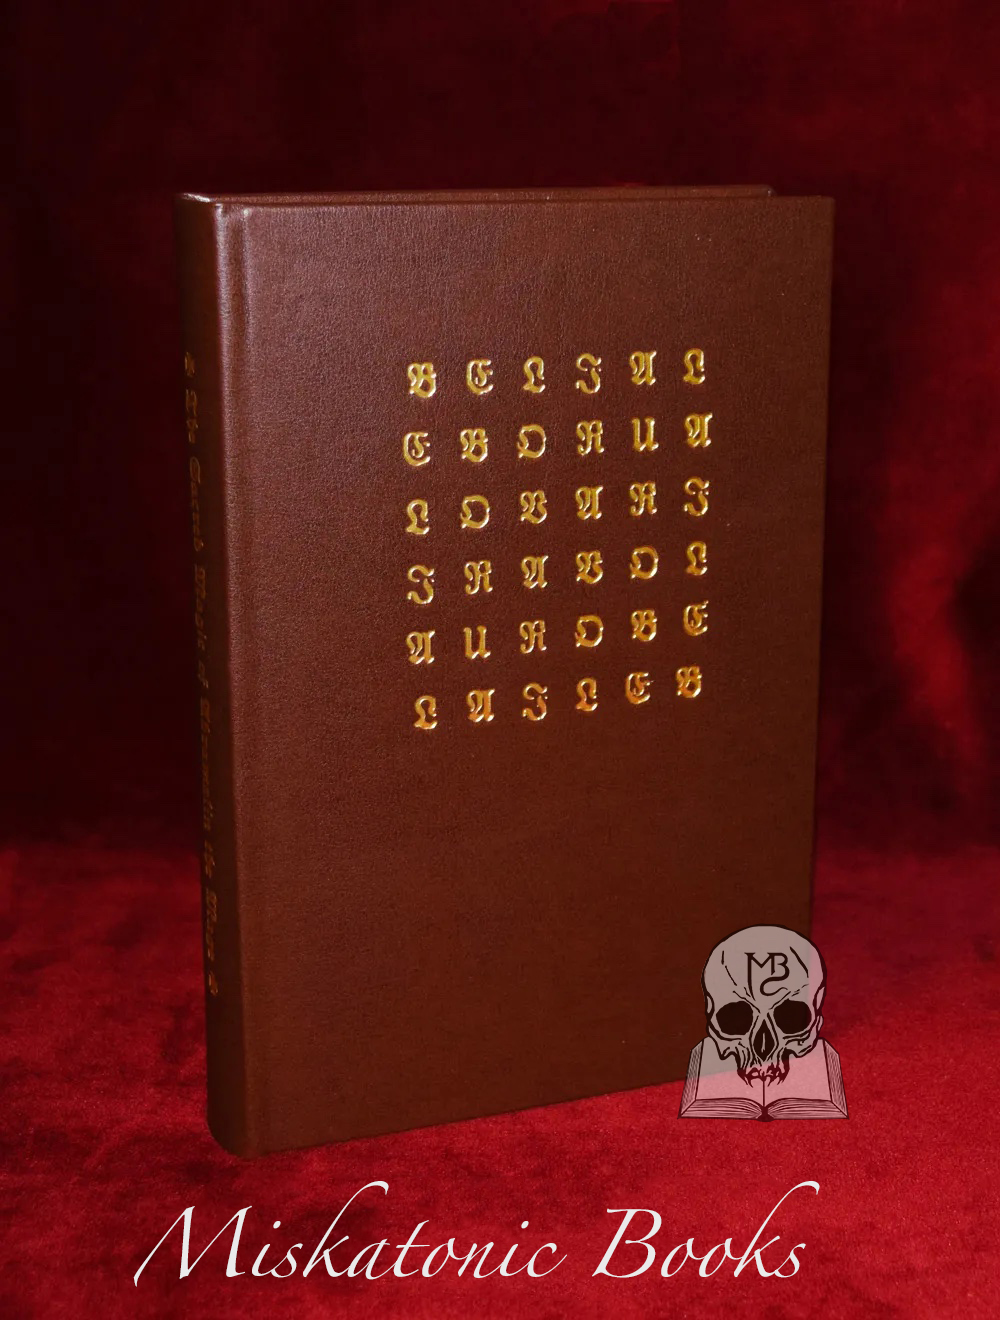 THE SACRED MAGIC OF ABRAMELIN THE MAGE - Leather Bound Limited Edition Hardcover